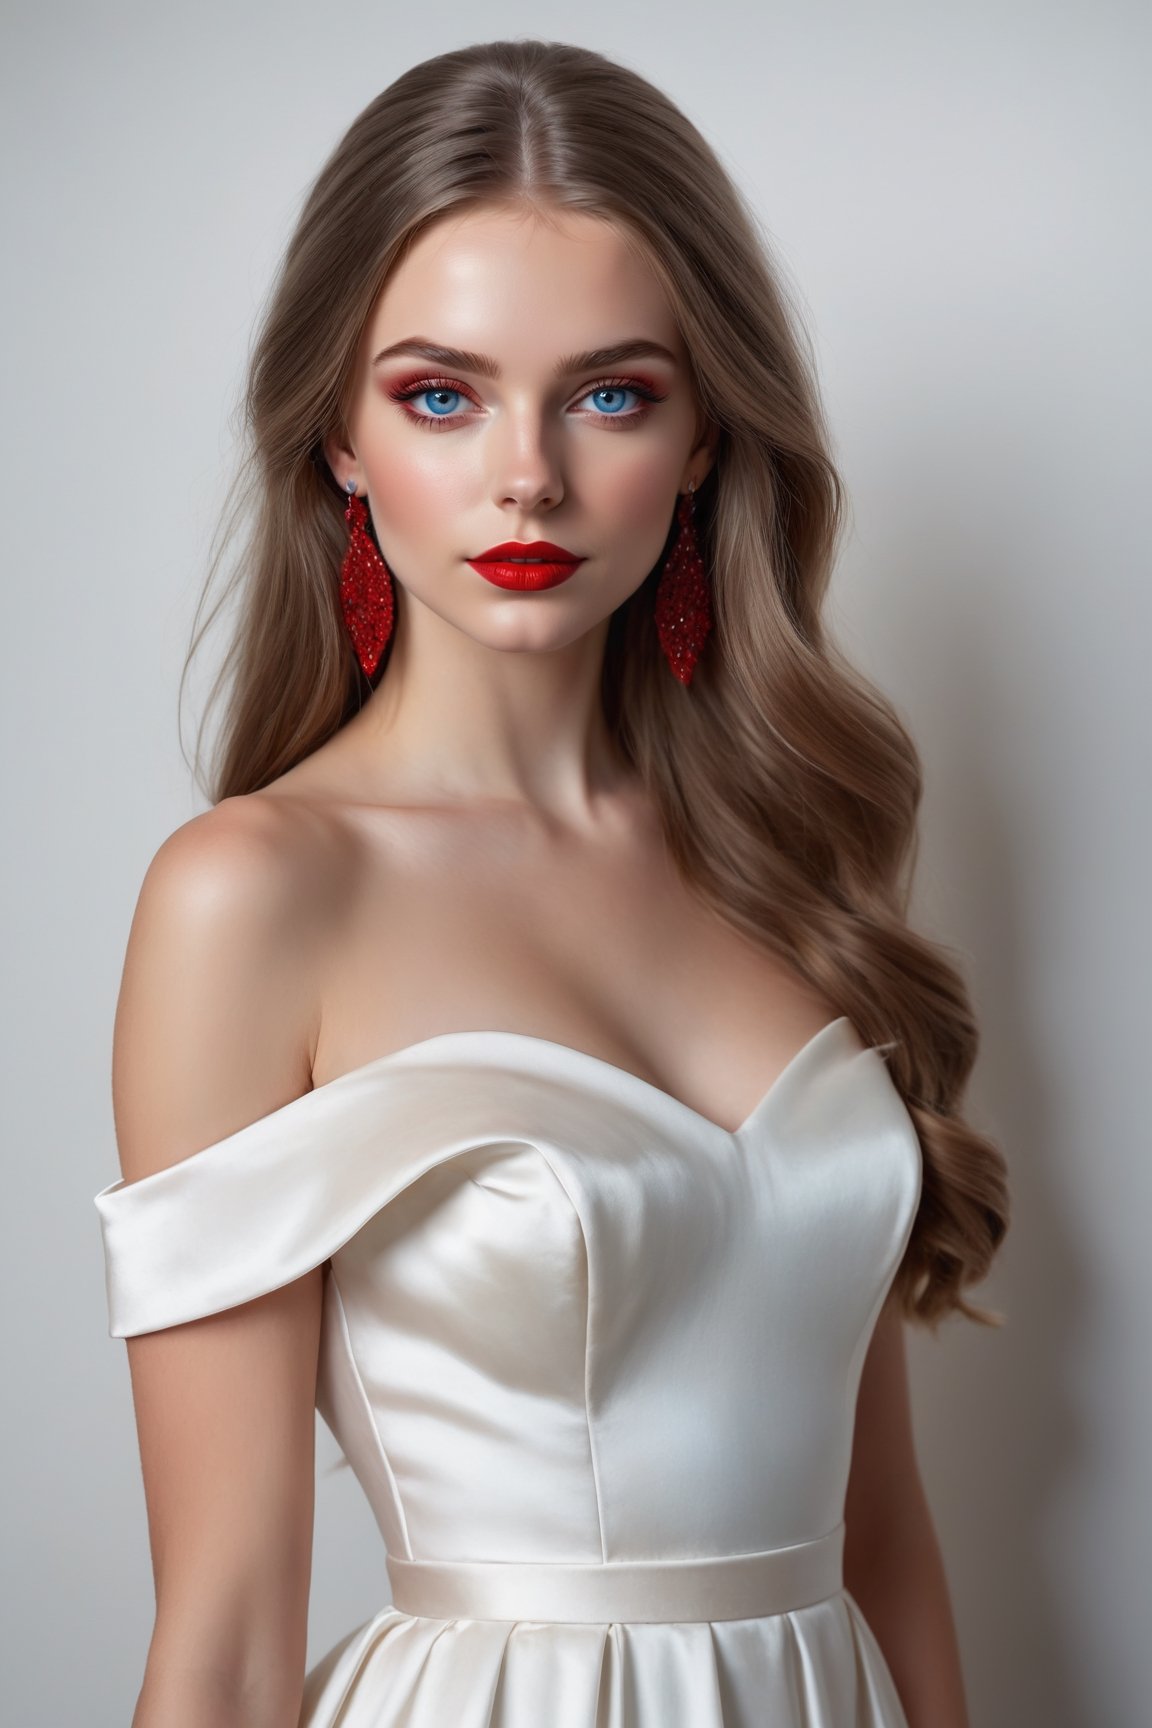 masterpiece, russian girl, detailed, blue eyes, full body, red lipstick, prom makeup, long straight hair, lots of red paint on white satin dress, off shoulder dress, realism,